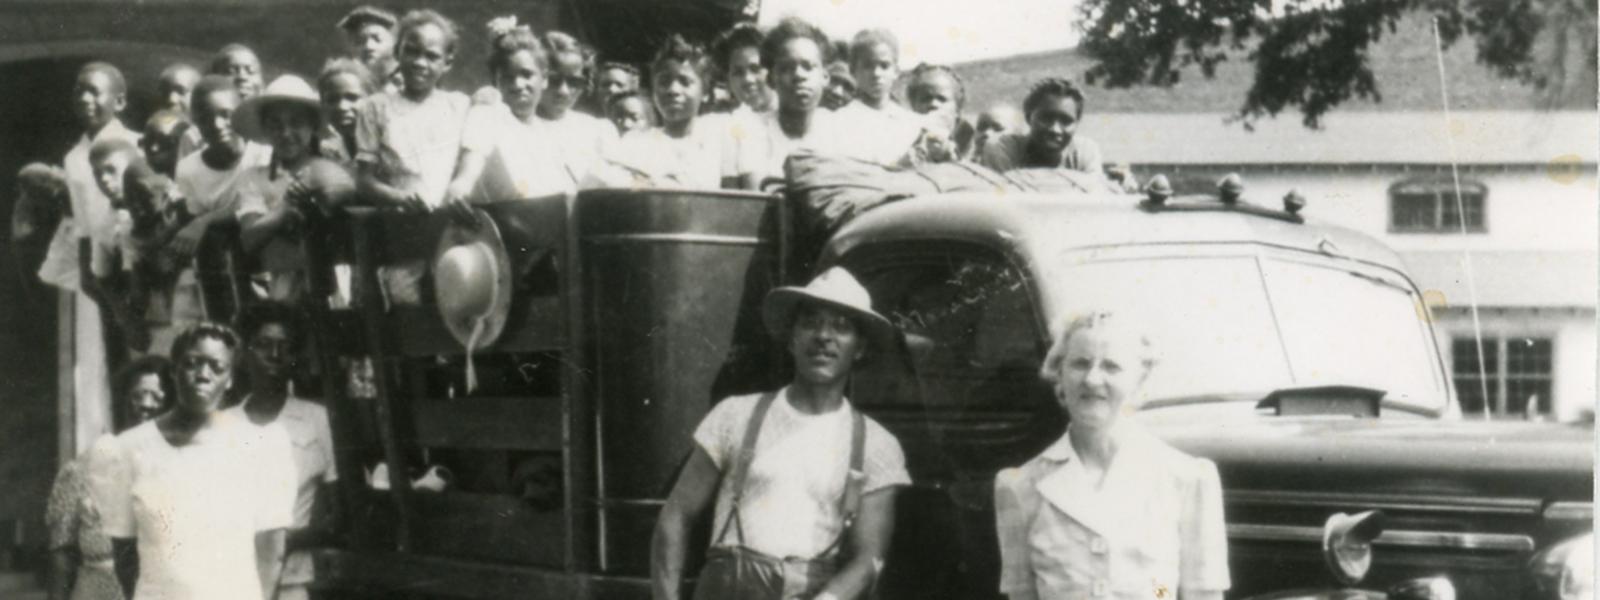 Marguerite McQuilkin with some of the first children at Bethel Bible Camp in 1941.